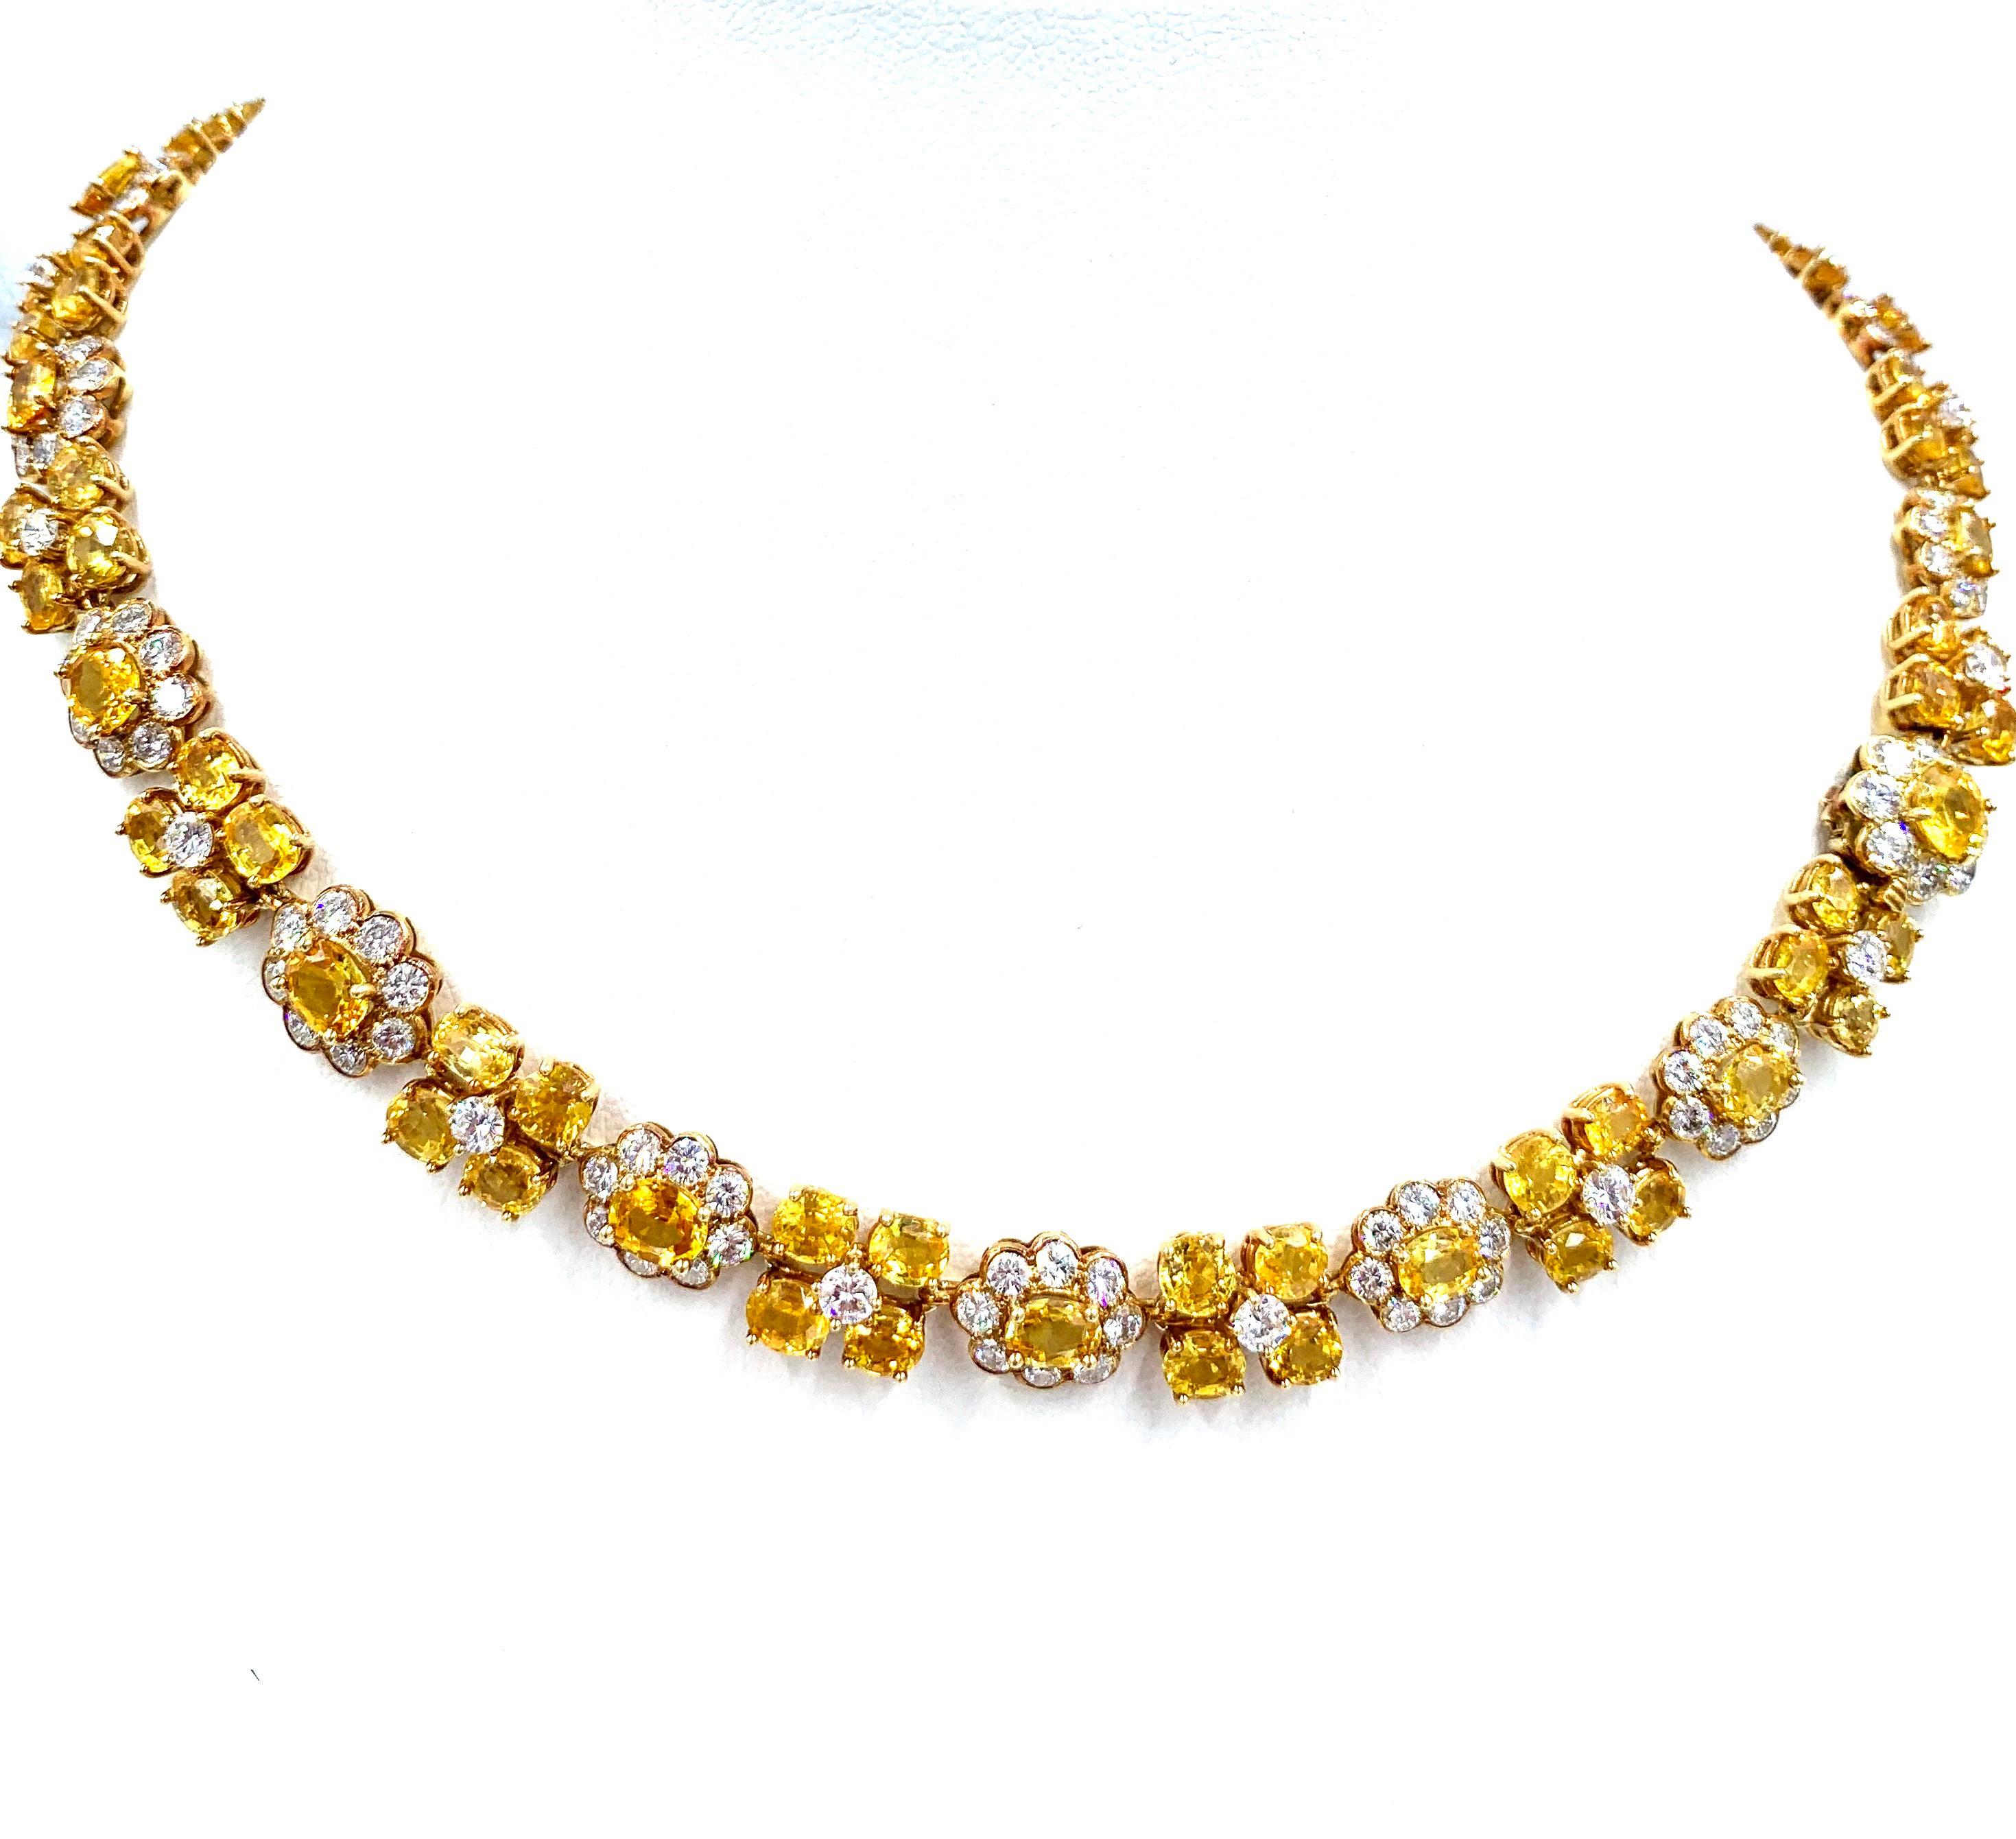 Van Cleef & Arpels Natural Yellow Ceylon Sapphire and Diamond Necklace In Good Condition For Sale In West Palm Beach, FL